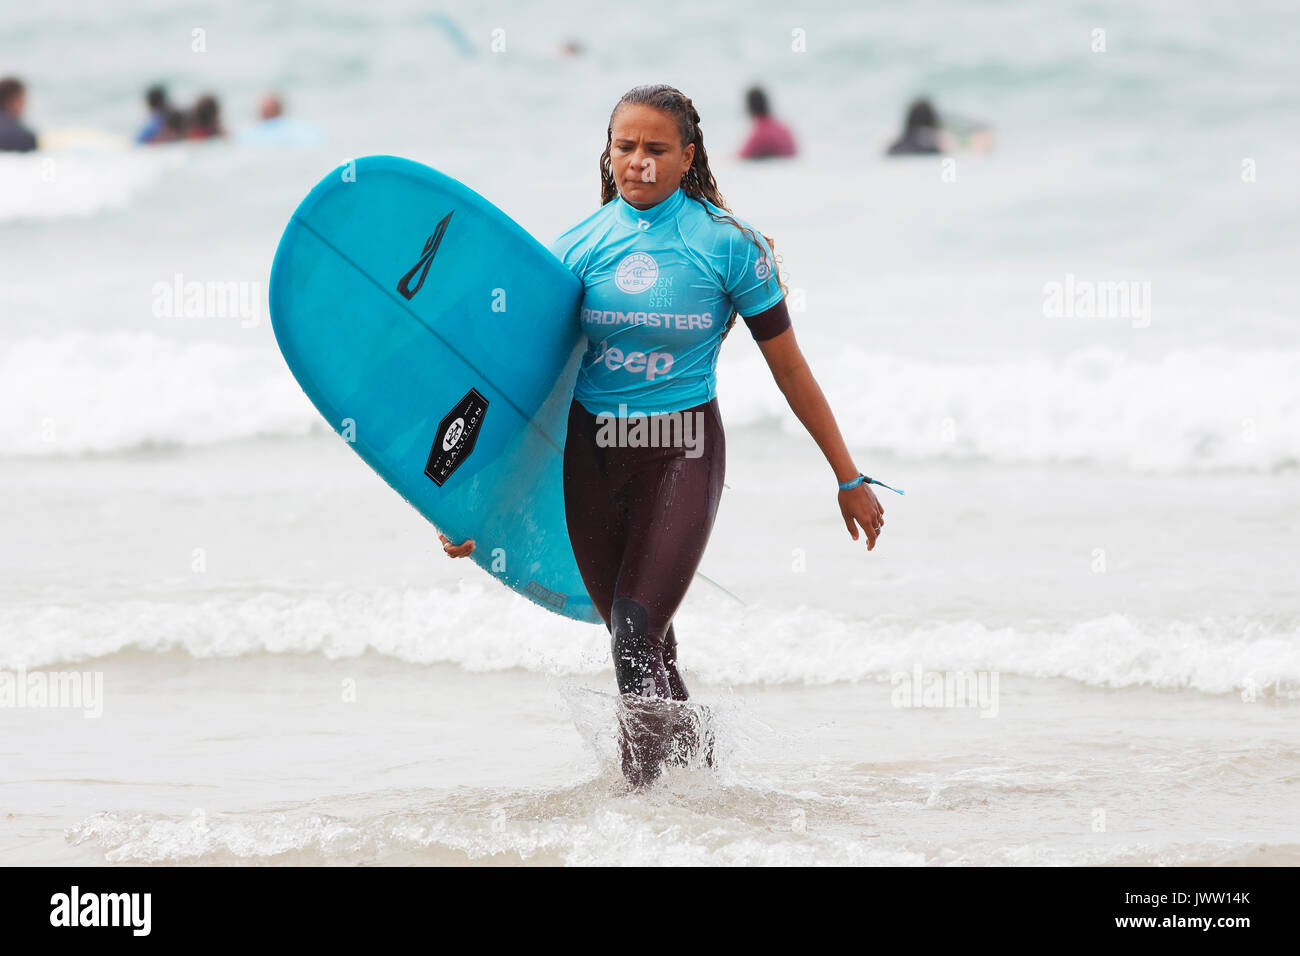 Fistral Beach, Newquay, Cornwall, UK. 13th Aug, 2017. Surfers take part in Day 5 of the Boardmasters Championship. This featured longboard surfers from around the world. Credit: Nicholas Burningham/Alamy Live News Stock Photo